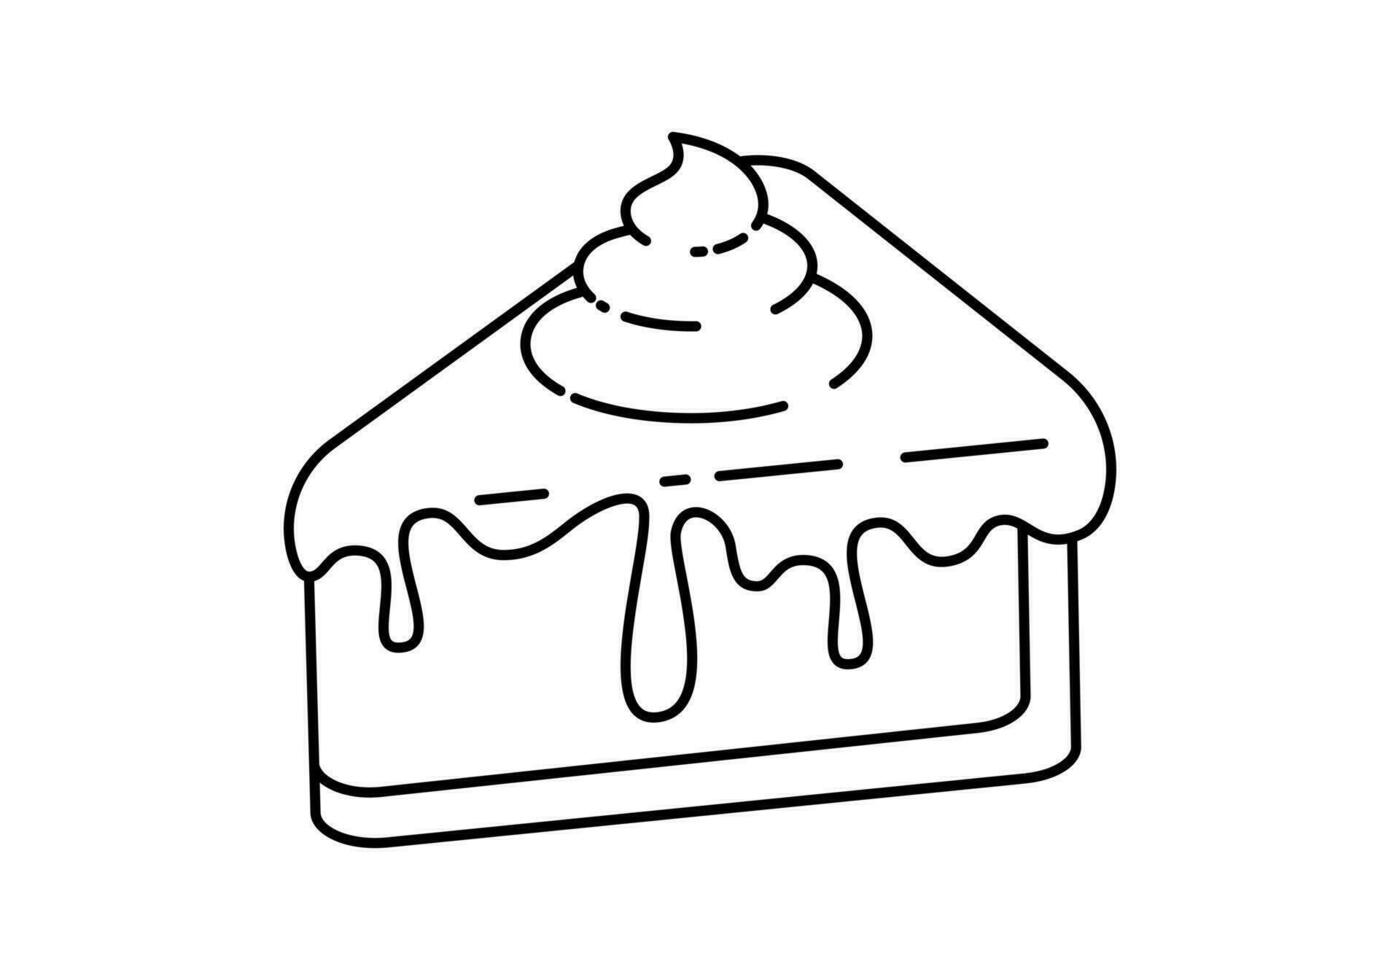 Cute Slice of Cake. Vector Line Art Illustration of a cute slice of cake, creatively designed in black lines on an isolated cutout background.